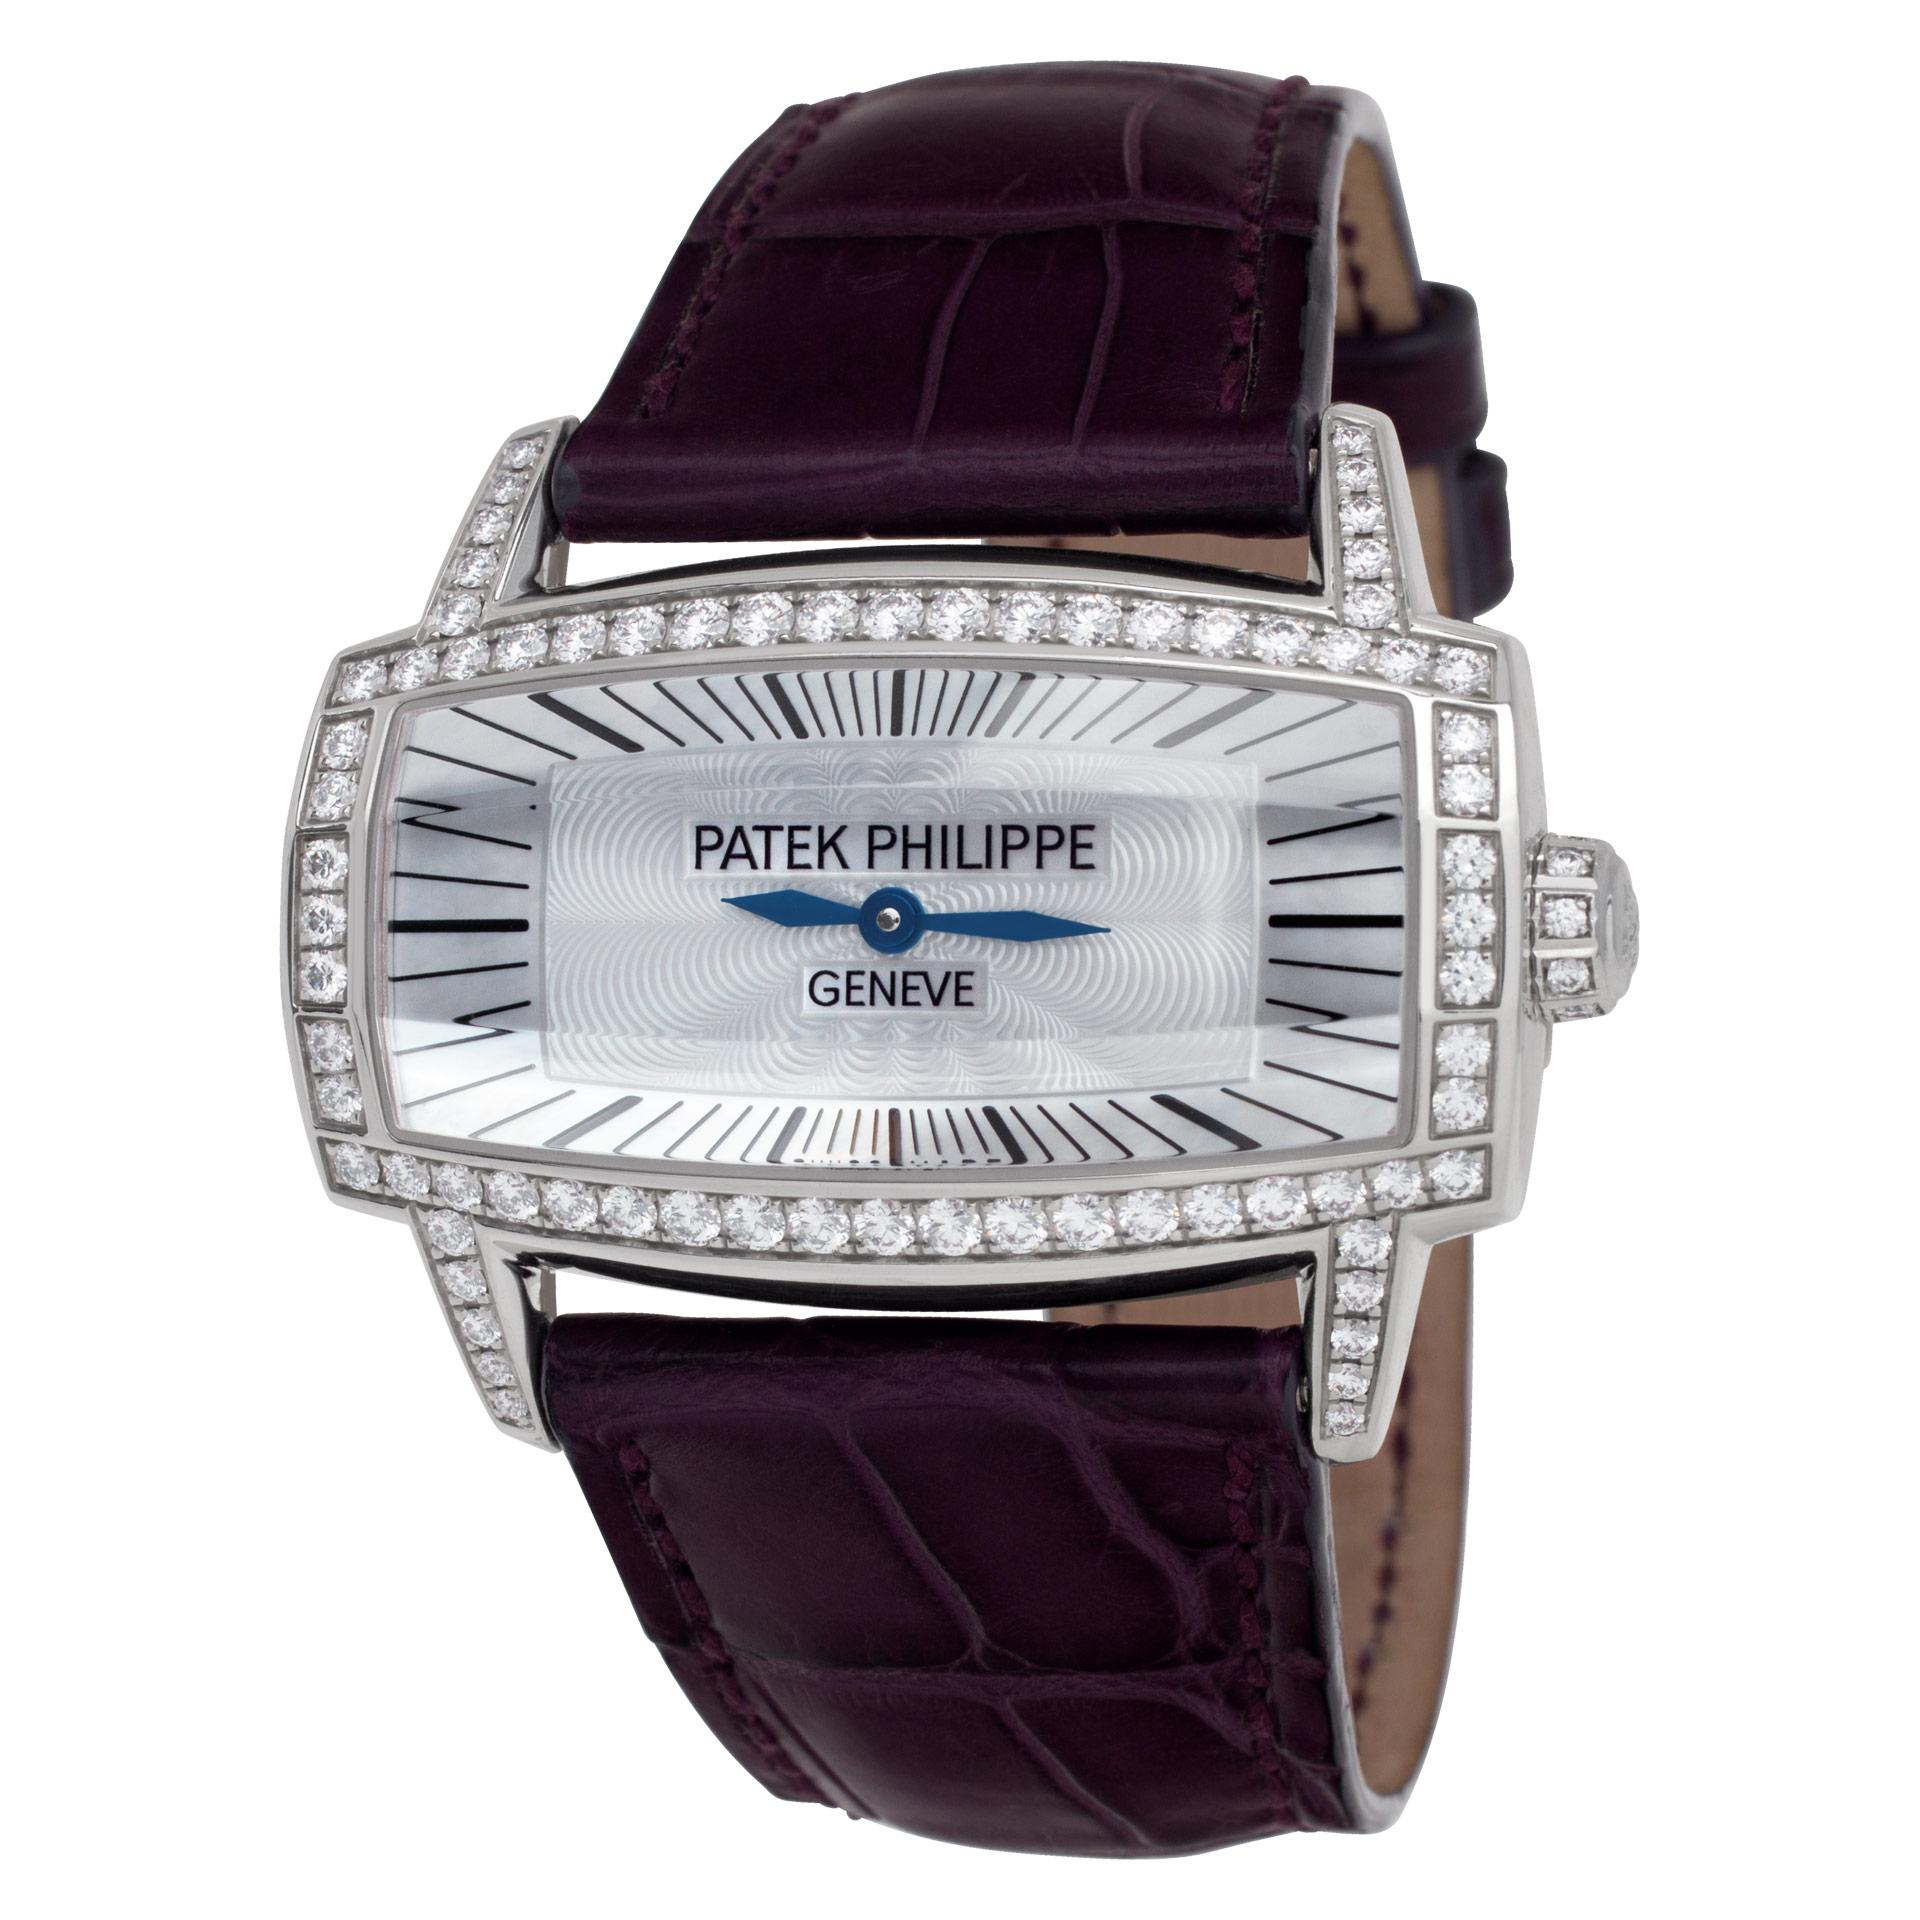 Elegant Patek Philippe Gondolo Gemma in 18k white gold diamond case and lugs on a leather strap with Patek Philippe 18k tang buckle. Quartz. With papers. 37 mm x 22 mm case size. Ref 4981G-001. Circa 2014. Fine Pre-owned Patek Philippe Watch. 